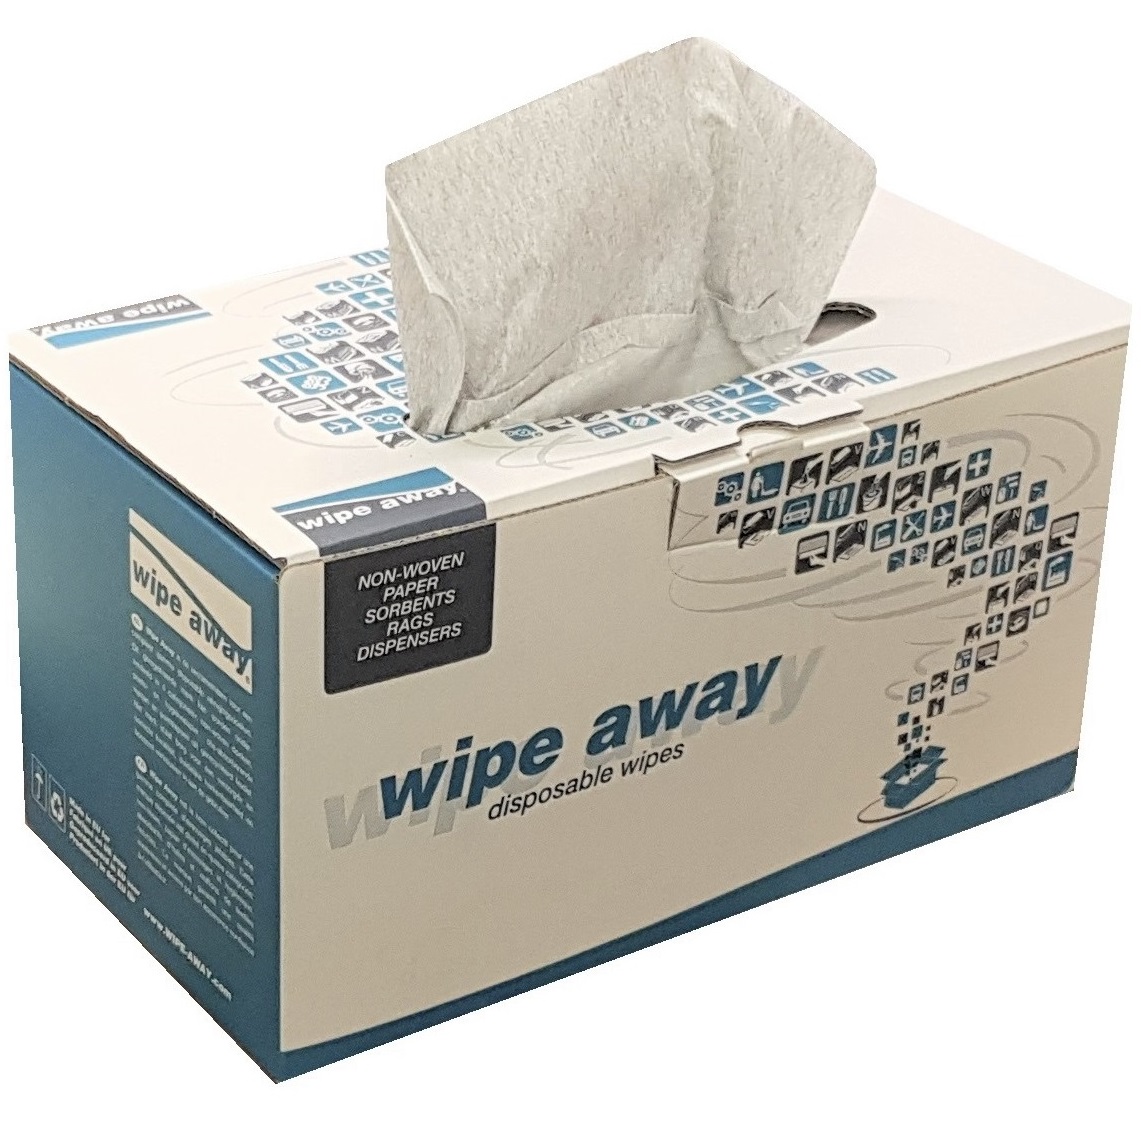 KX70 Industrial Strength Lint Free Wipes 42x36cms Case of 320